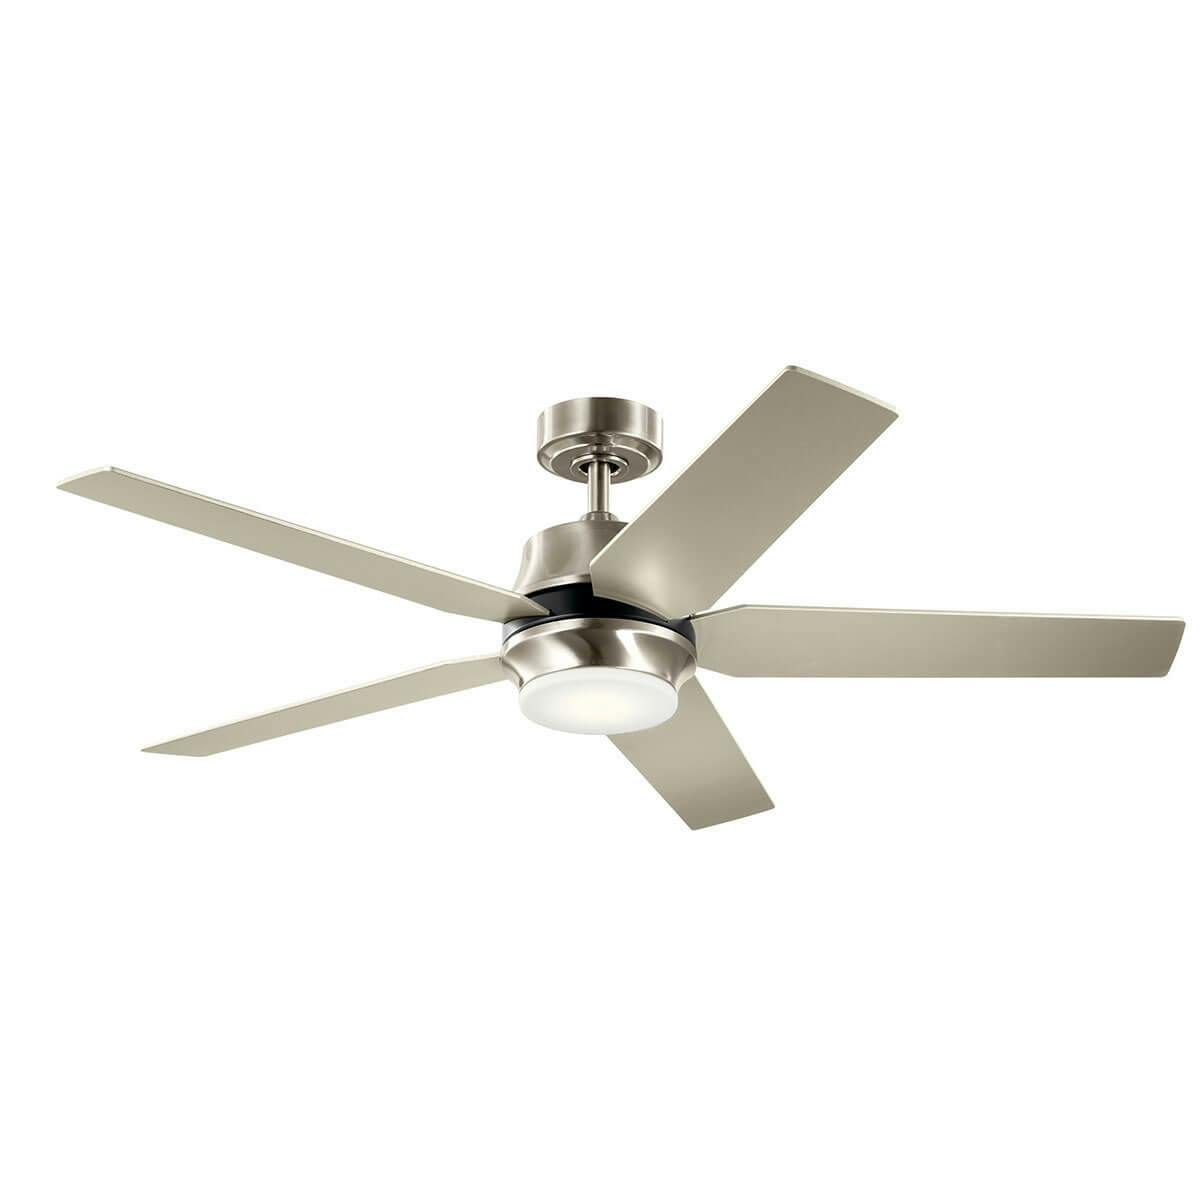 Maeve LED 52" Ceiling Fan Stainless Steel on a white background